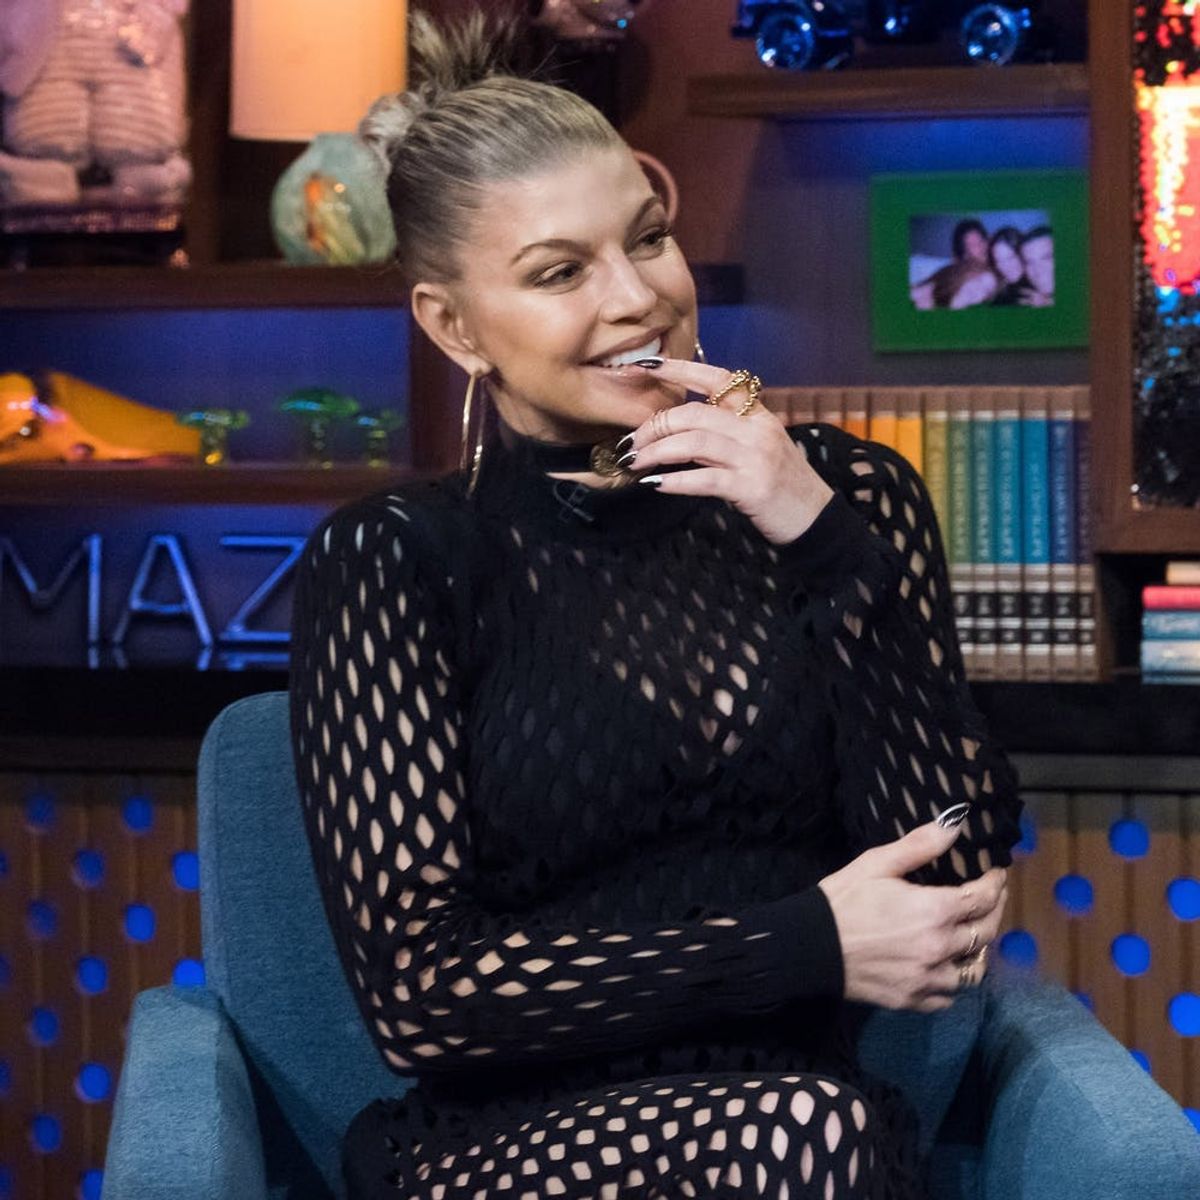 Fergie Downplays Her Fling With Justin Timberlake, Rates Mario Lopez’s Kissing Skills